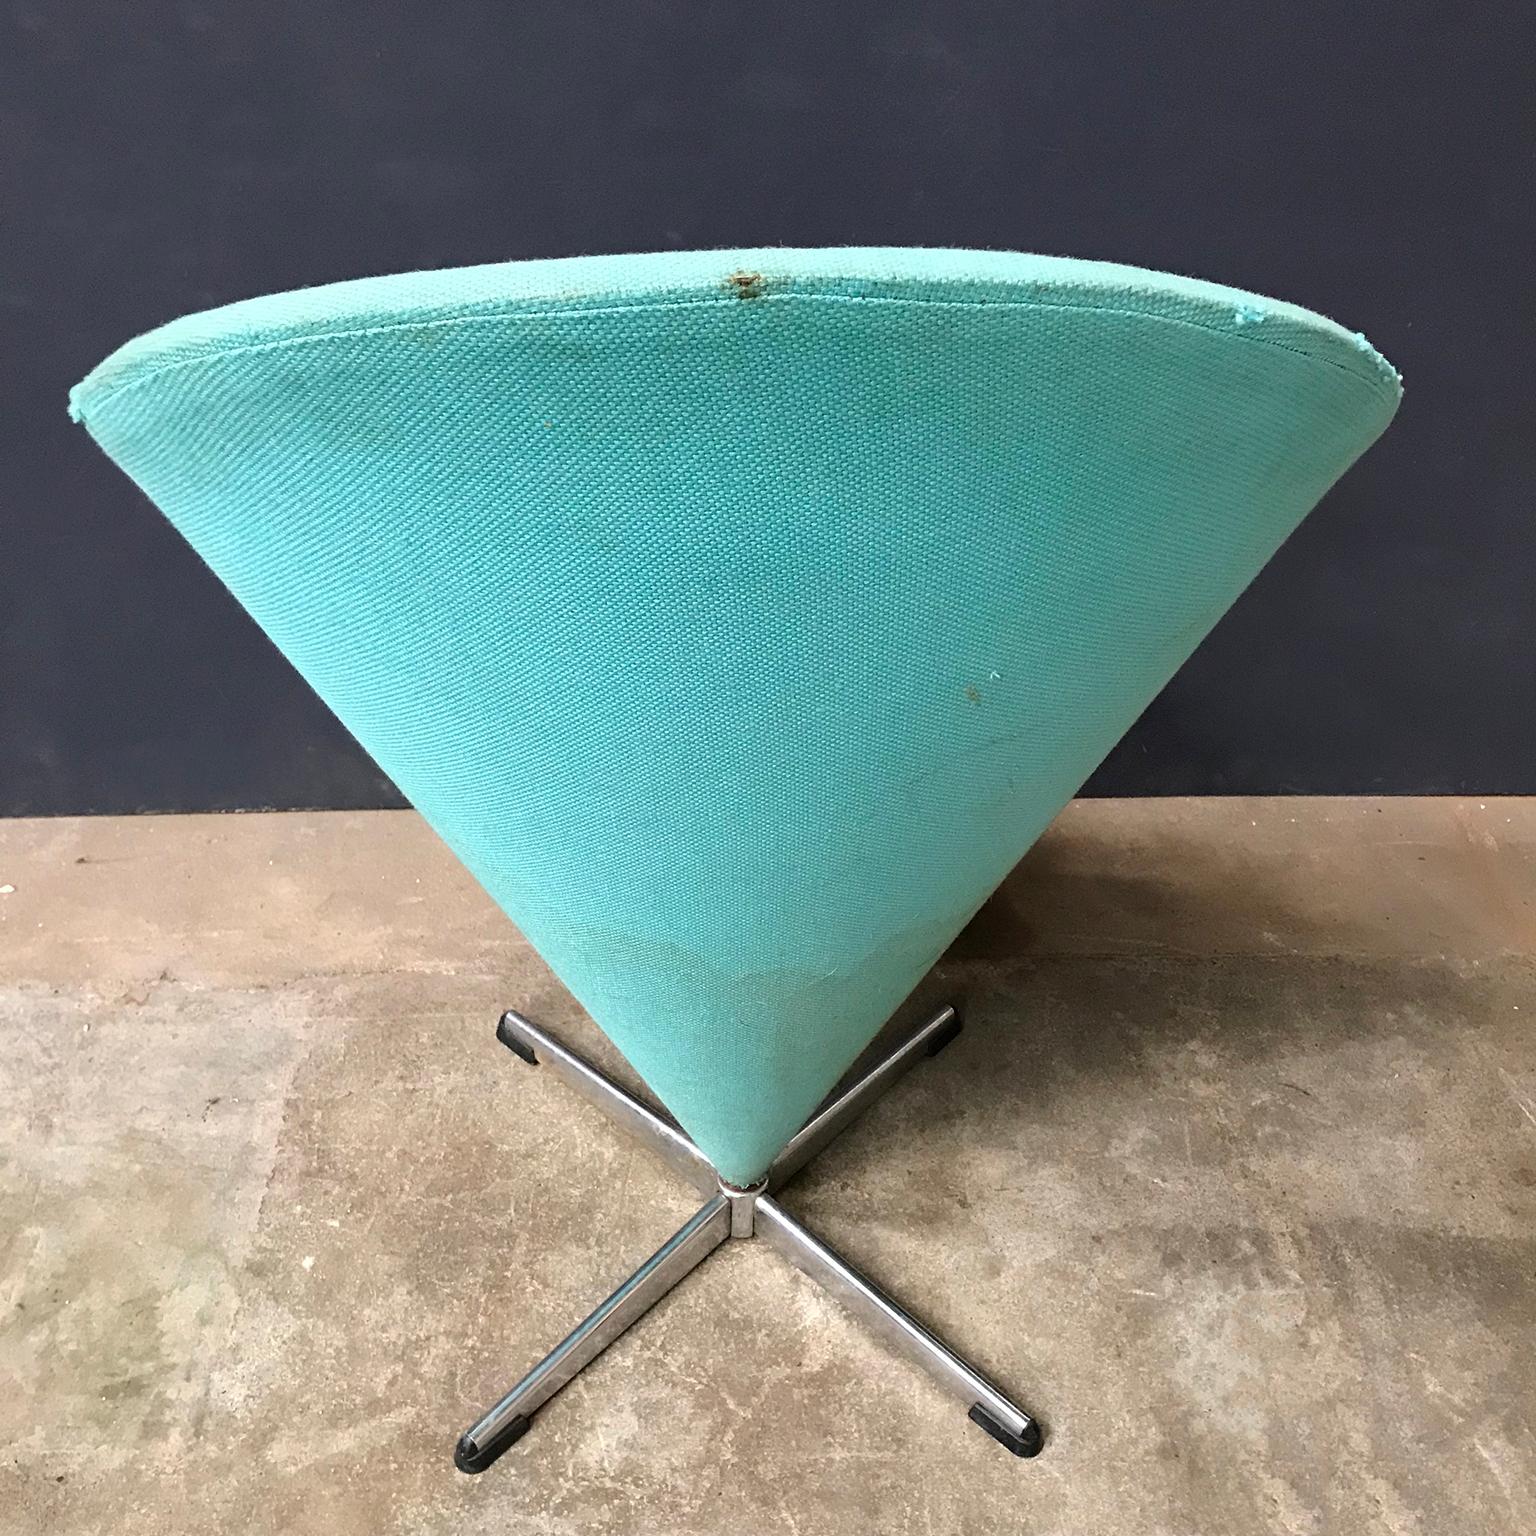 Mid-20th Century 1958, Verner Panton for Rosenthal, Cone Chair in Original Turquoise Fabric